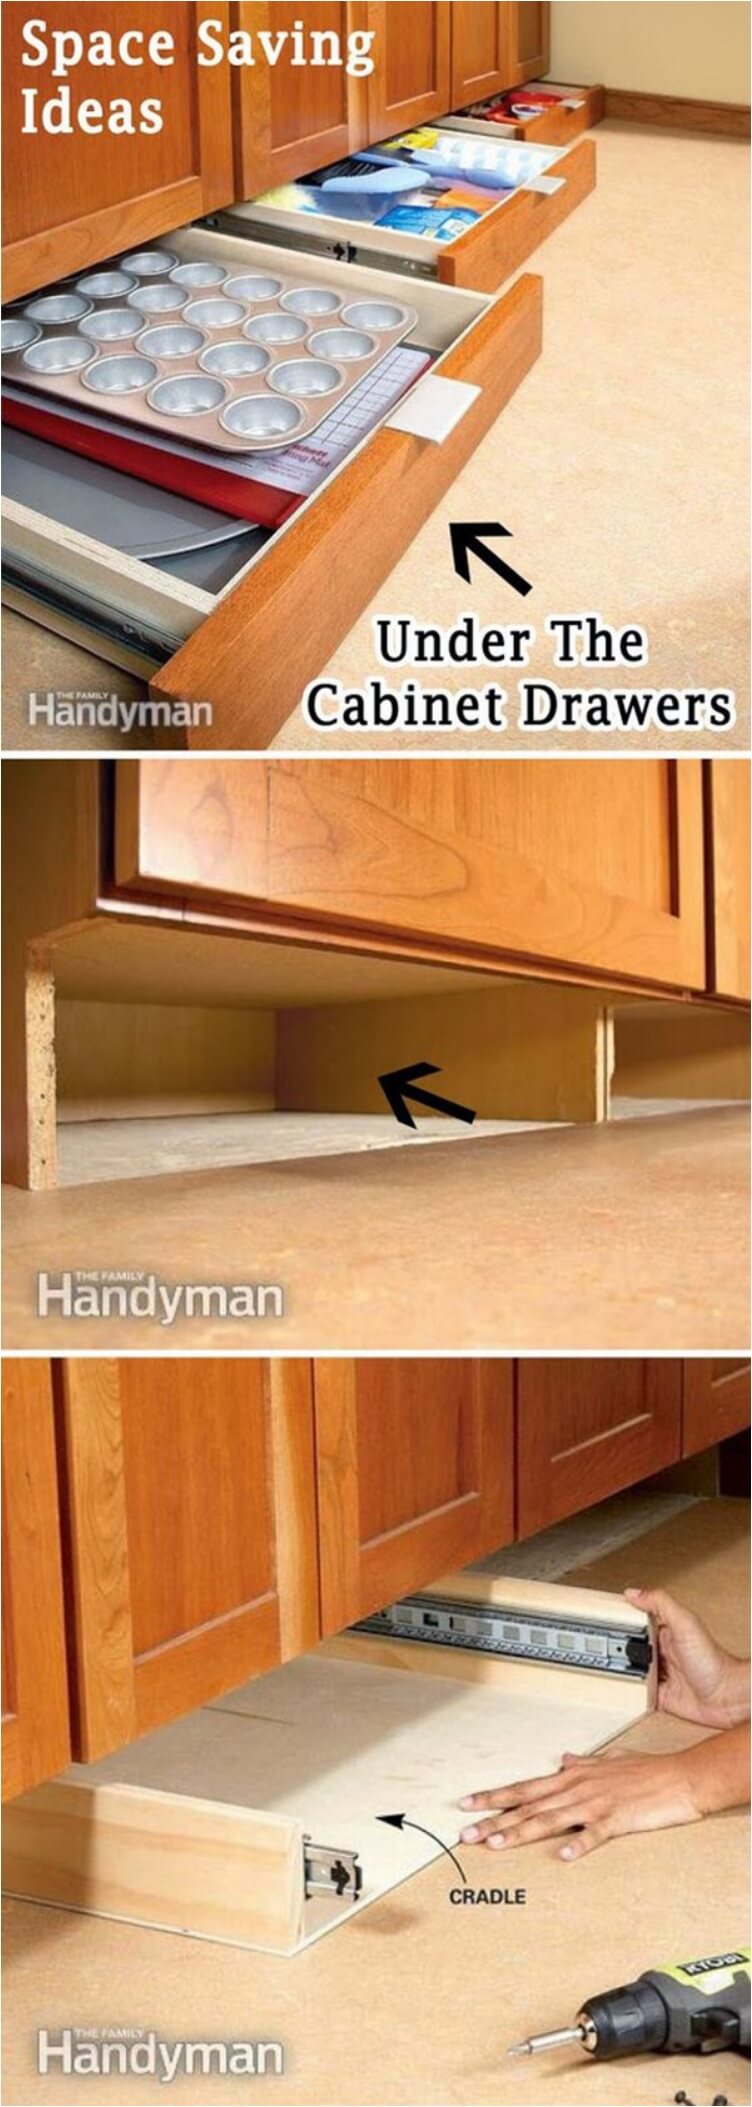 Simple, Space-Saving Under Cabinet Drawer Add-Ons